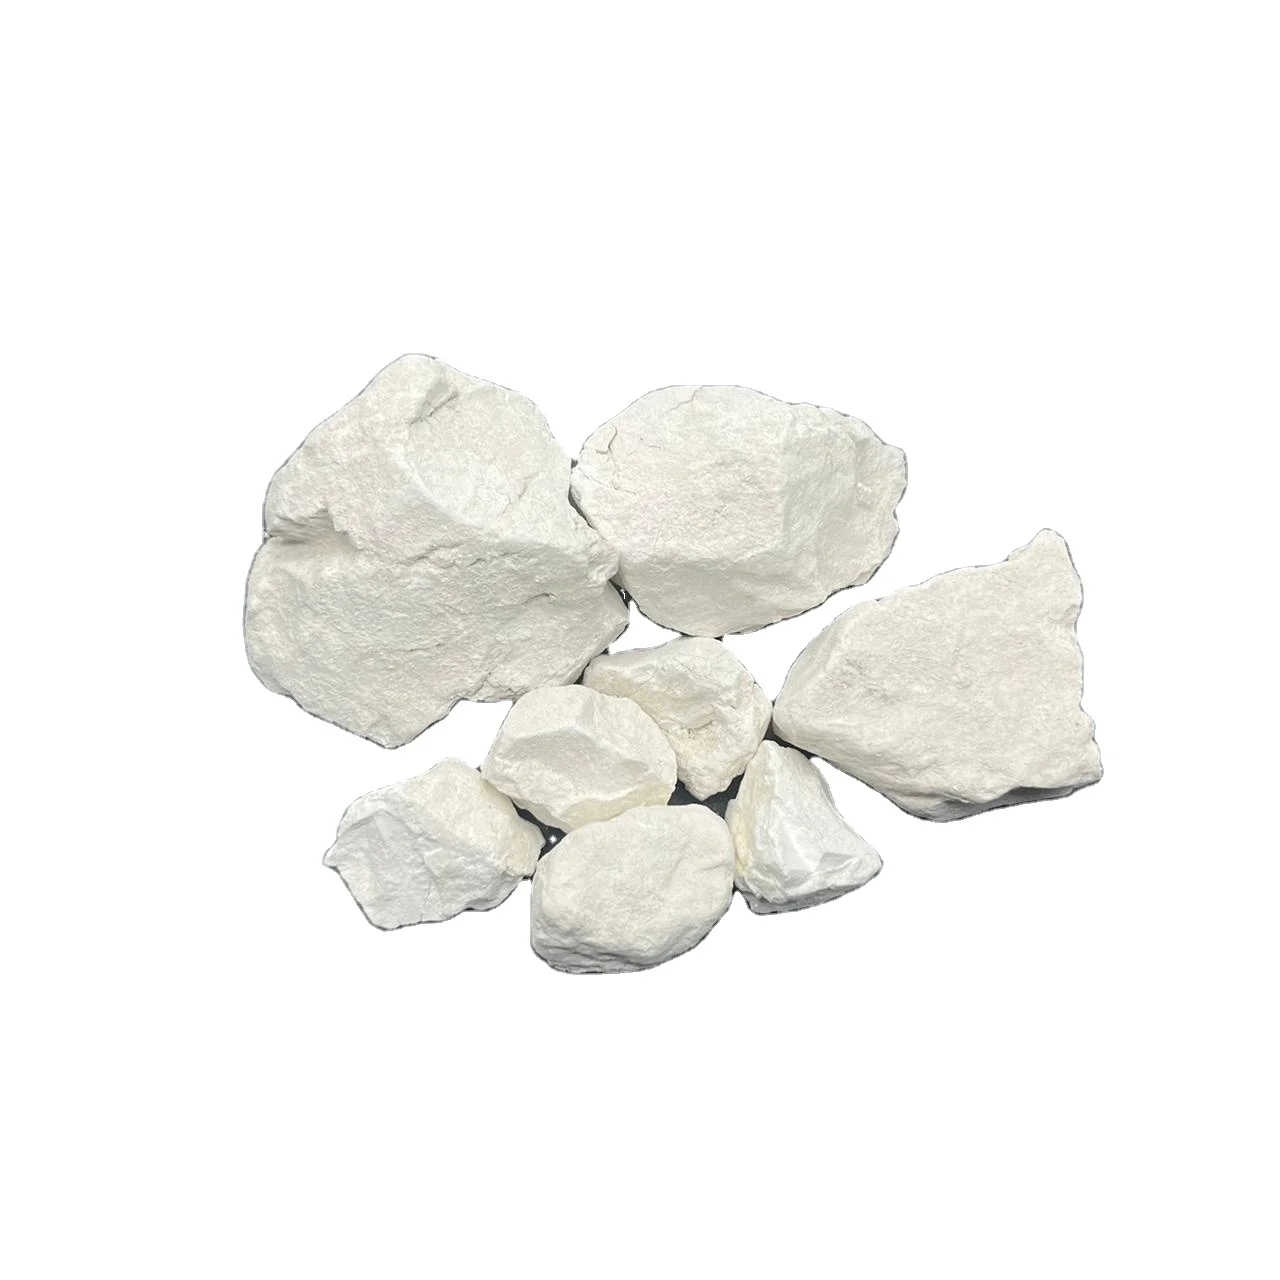 Best Seller Cheap price Quicklime Lumps Quick Lime CaO Burnt Lime Vietnam For Paper Manufacture (10000008623207)